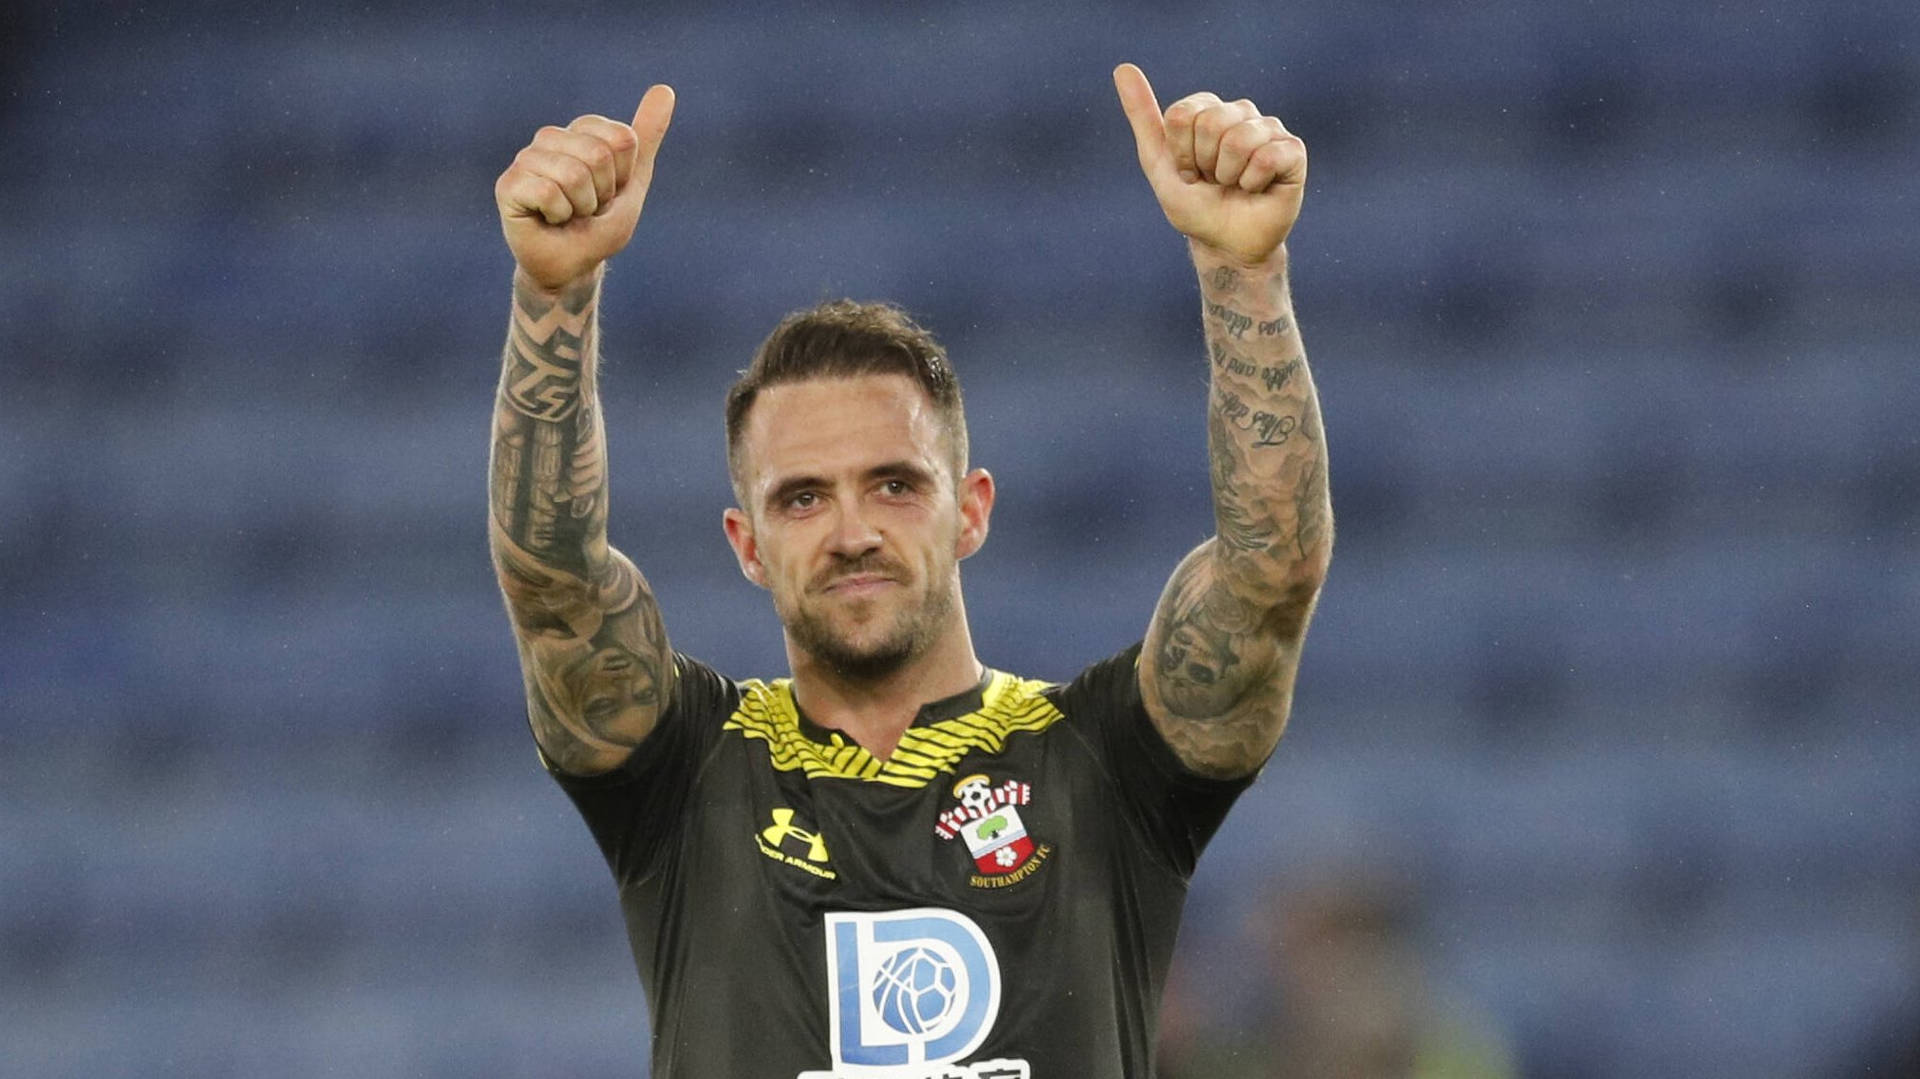 Danny Ings Two Thumbs Up Wallpaper